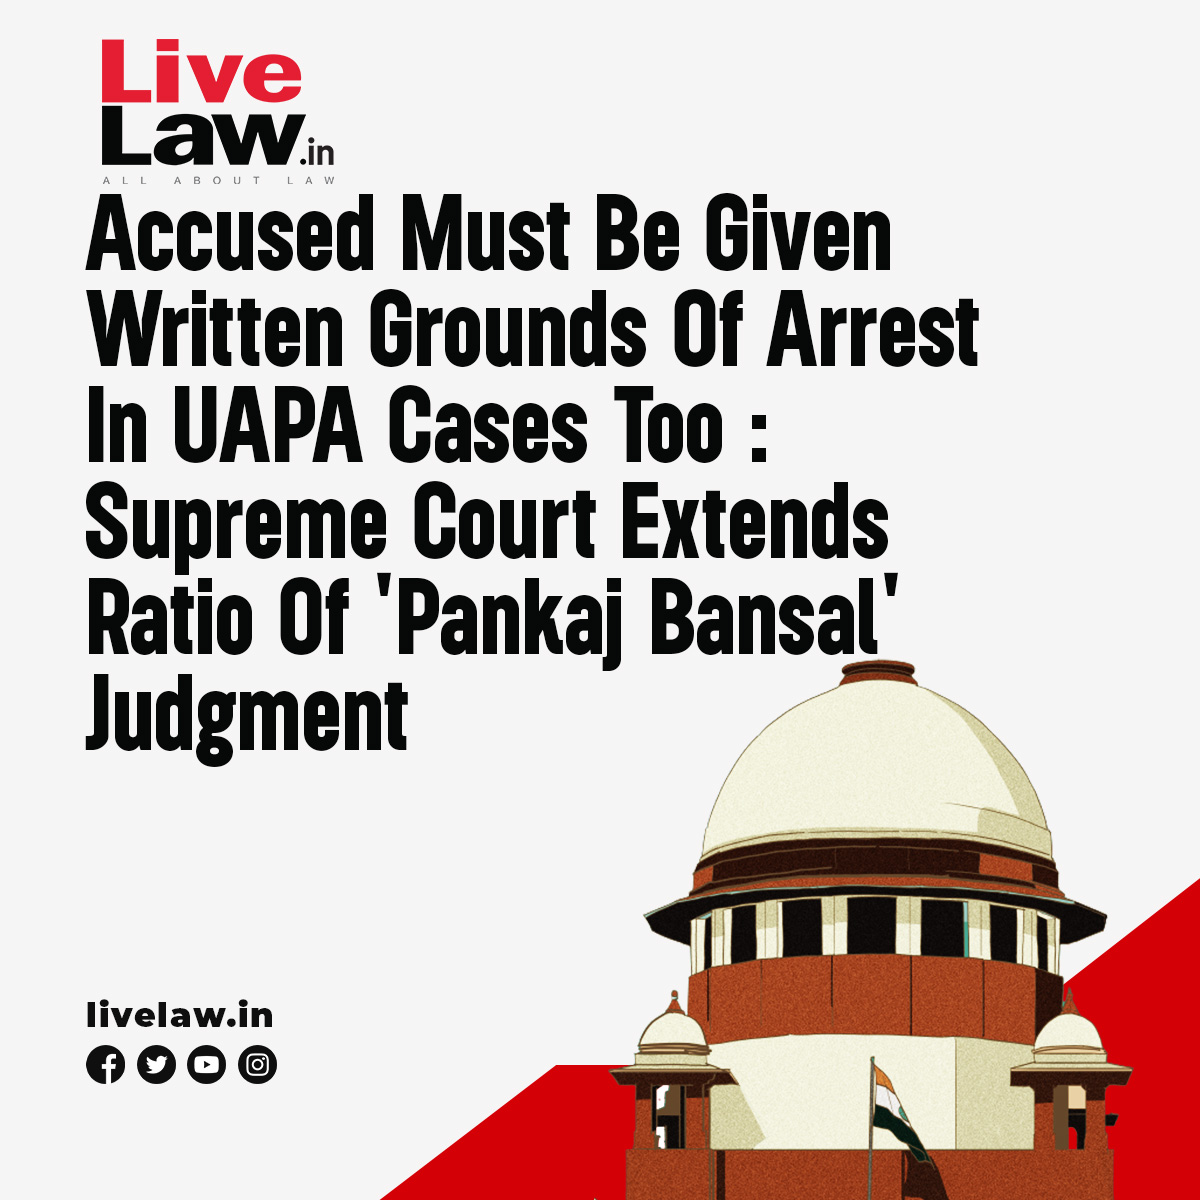 In one of the crucial developments, the Supreme Court (today on May 15), held that the ratio laid down in the judgment in the case Pankaj Bansal v Union of India mandating that grounds of arrest must be supplied to the accused in writing will also apply in the cases registered